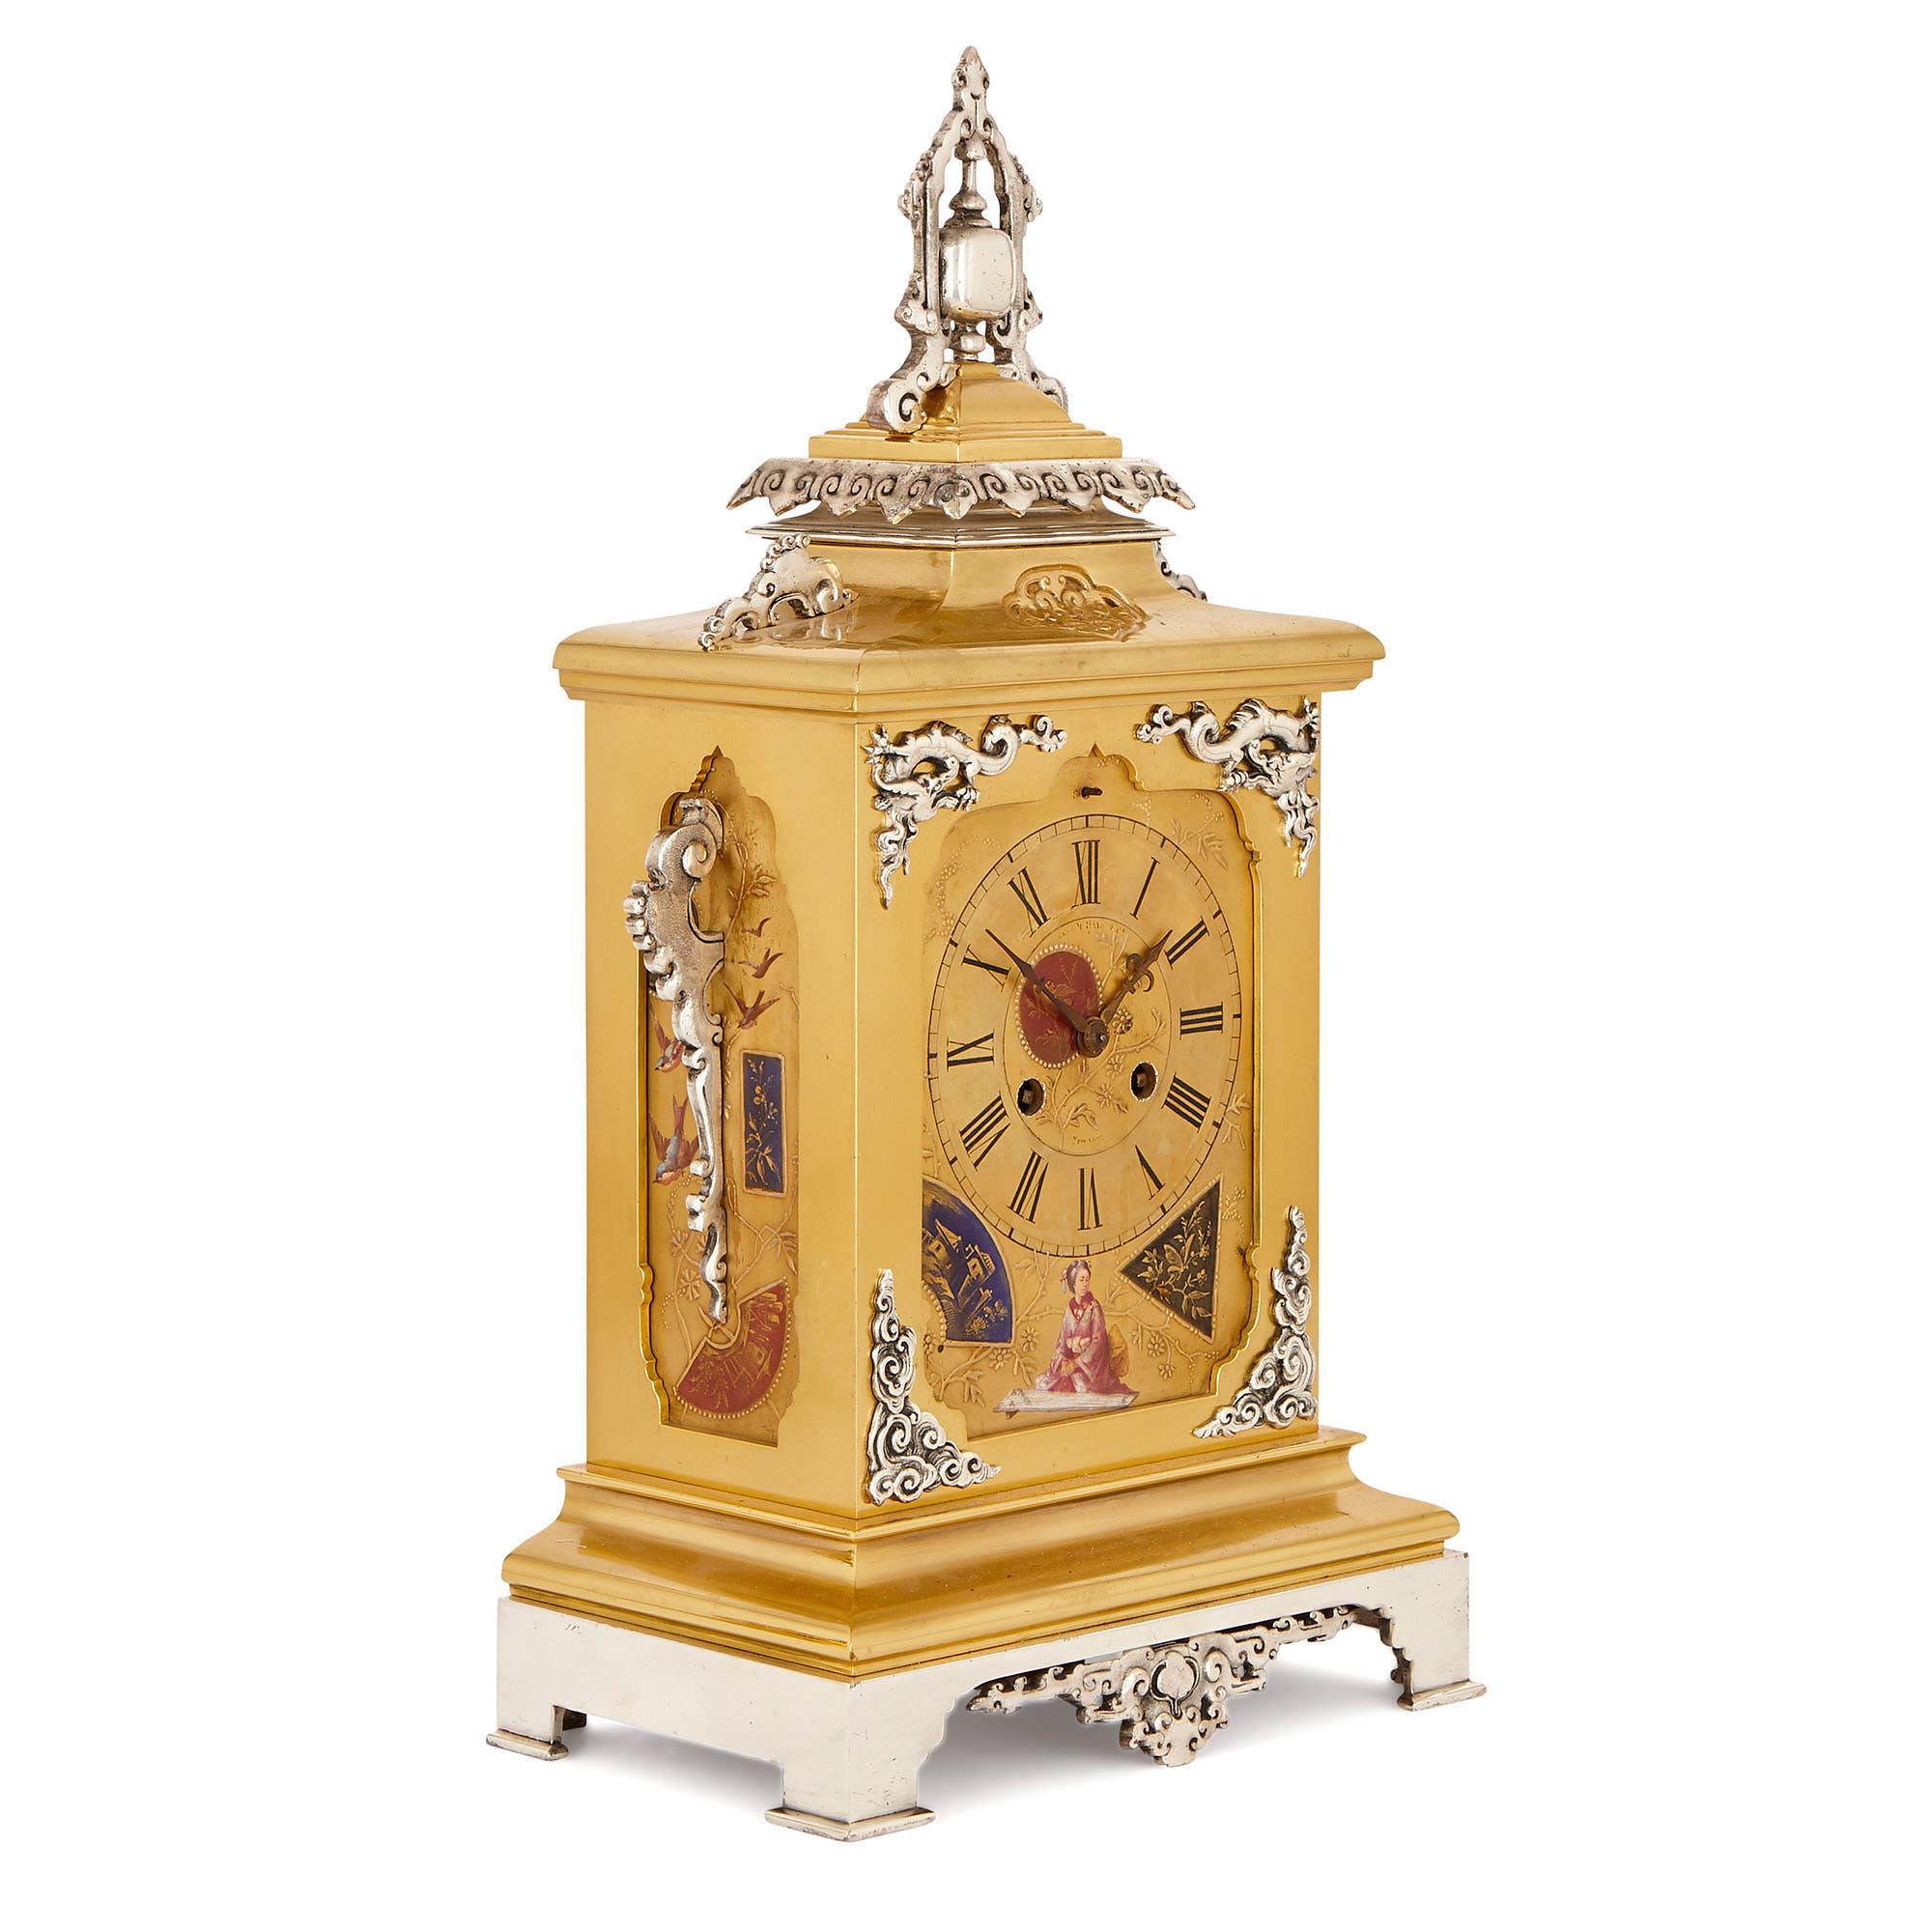 This Japanese style clock set was crafted in France in circa 1880. The set consists of a central clock, which is accompanied by two vases. 

The central clock features a gilt brass rectangular body with a pitched top, like a pavilion roof. The